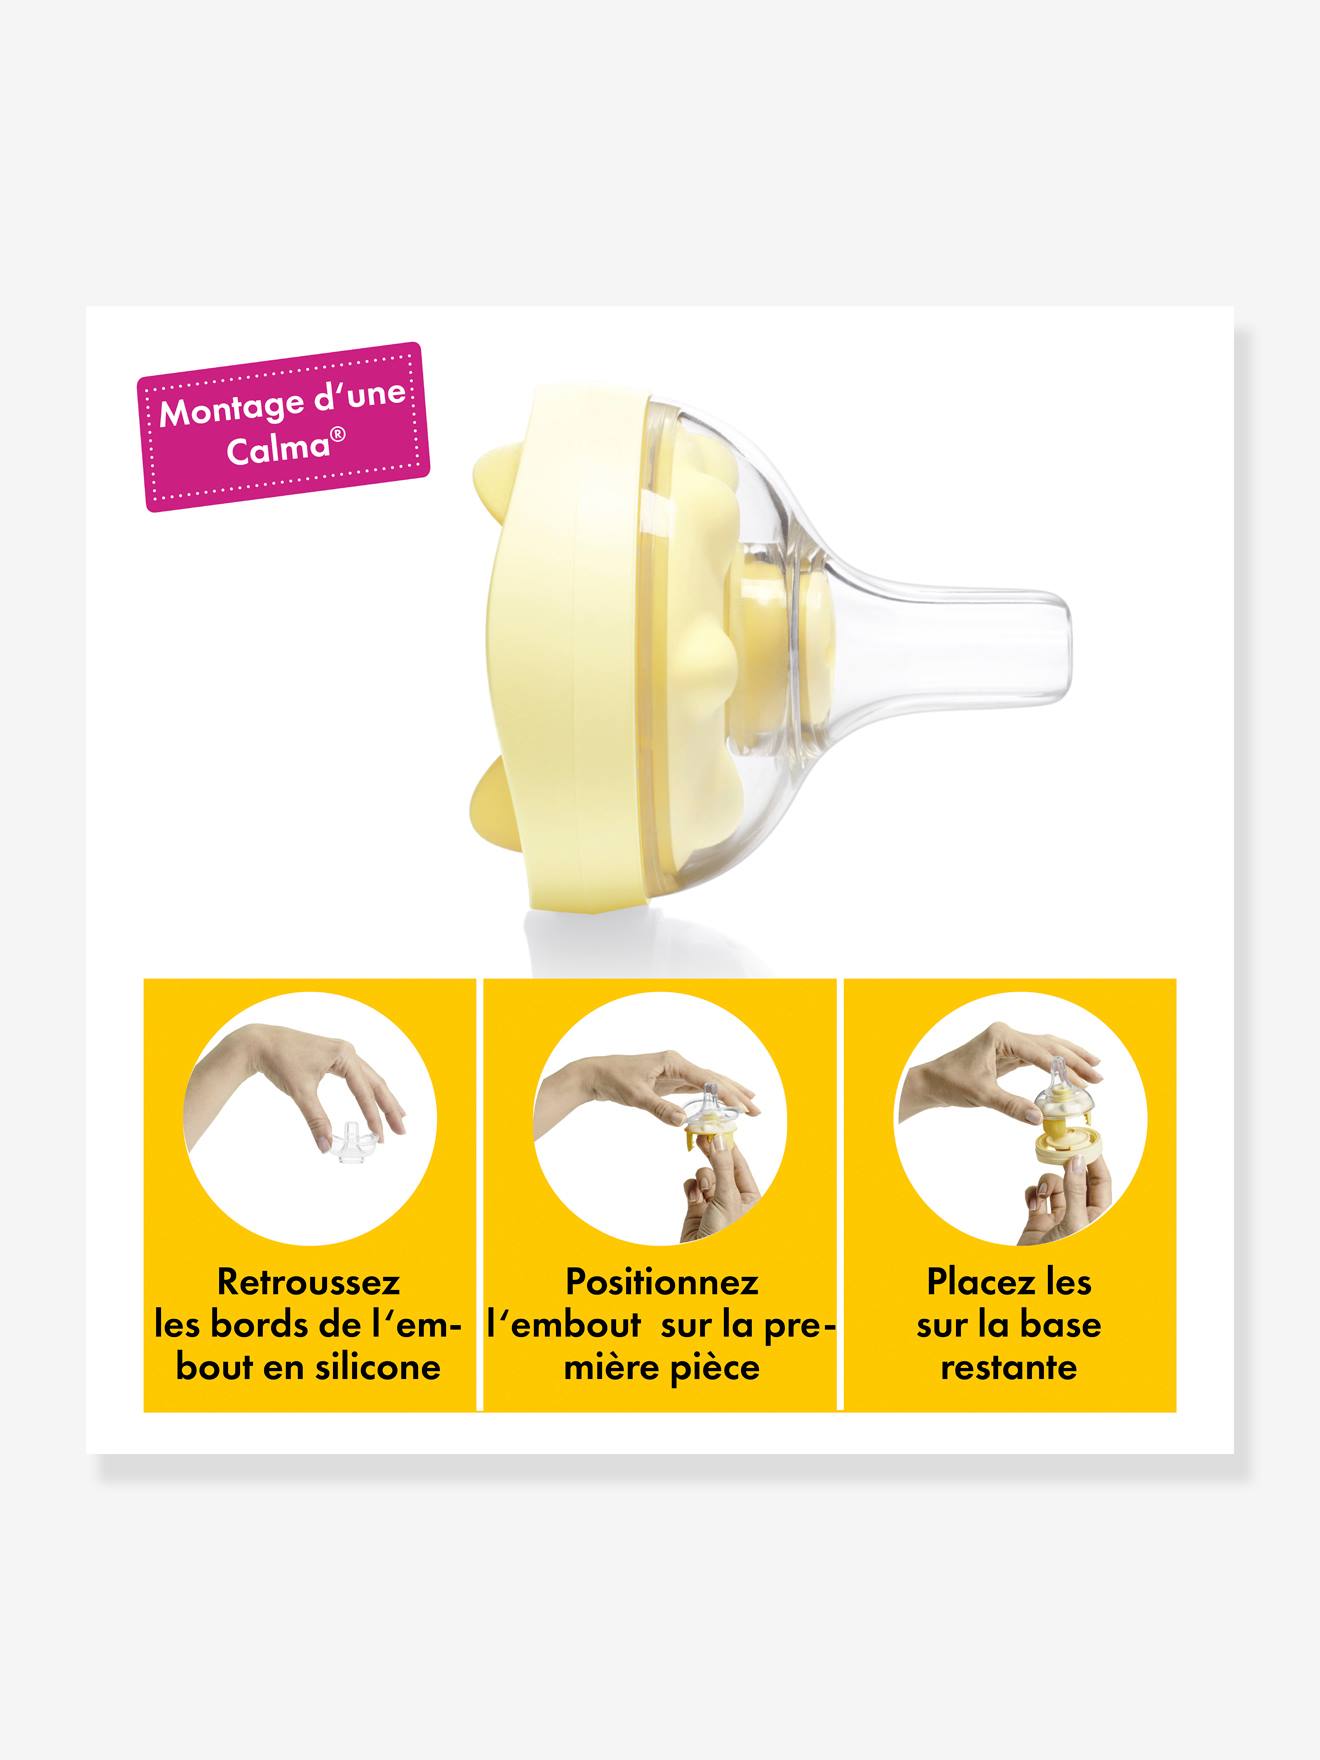 Medela Calma Teat with Bottle- Designed to work the same way as